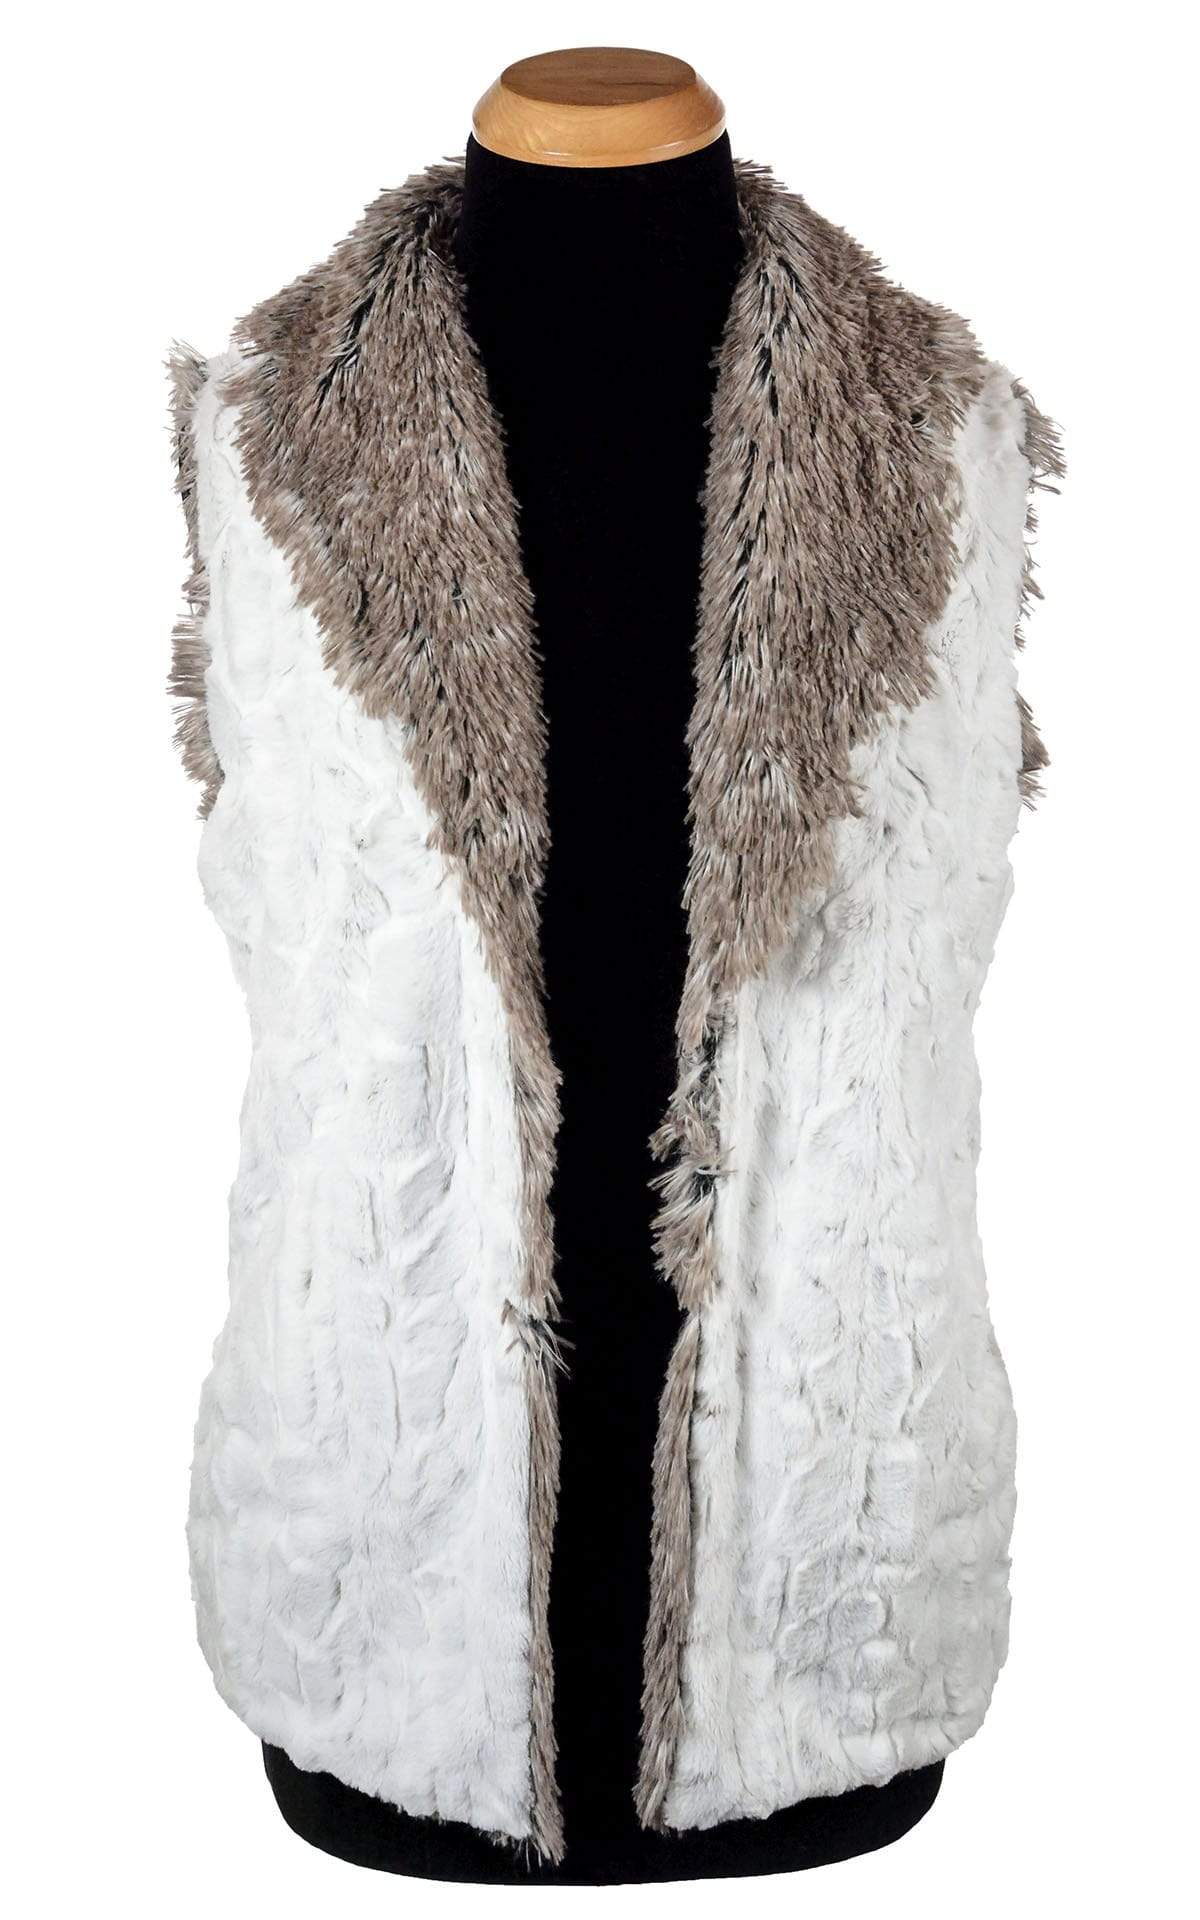 Shawl Collar Vest - Luxury Faux Fur in Winters Frost with Arctic Fox